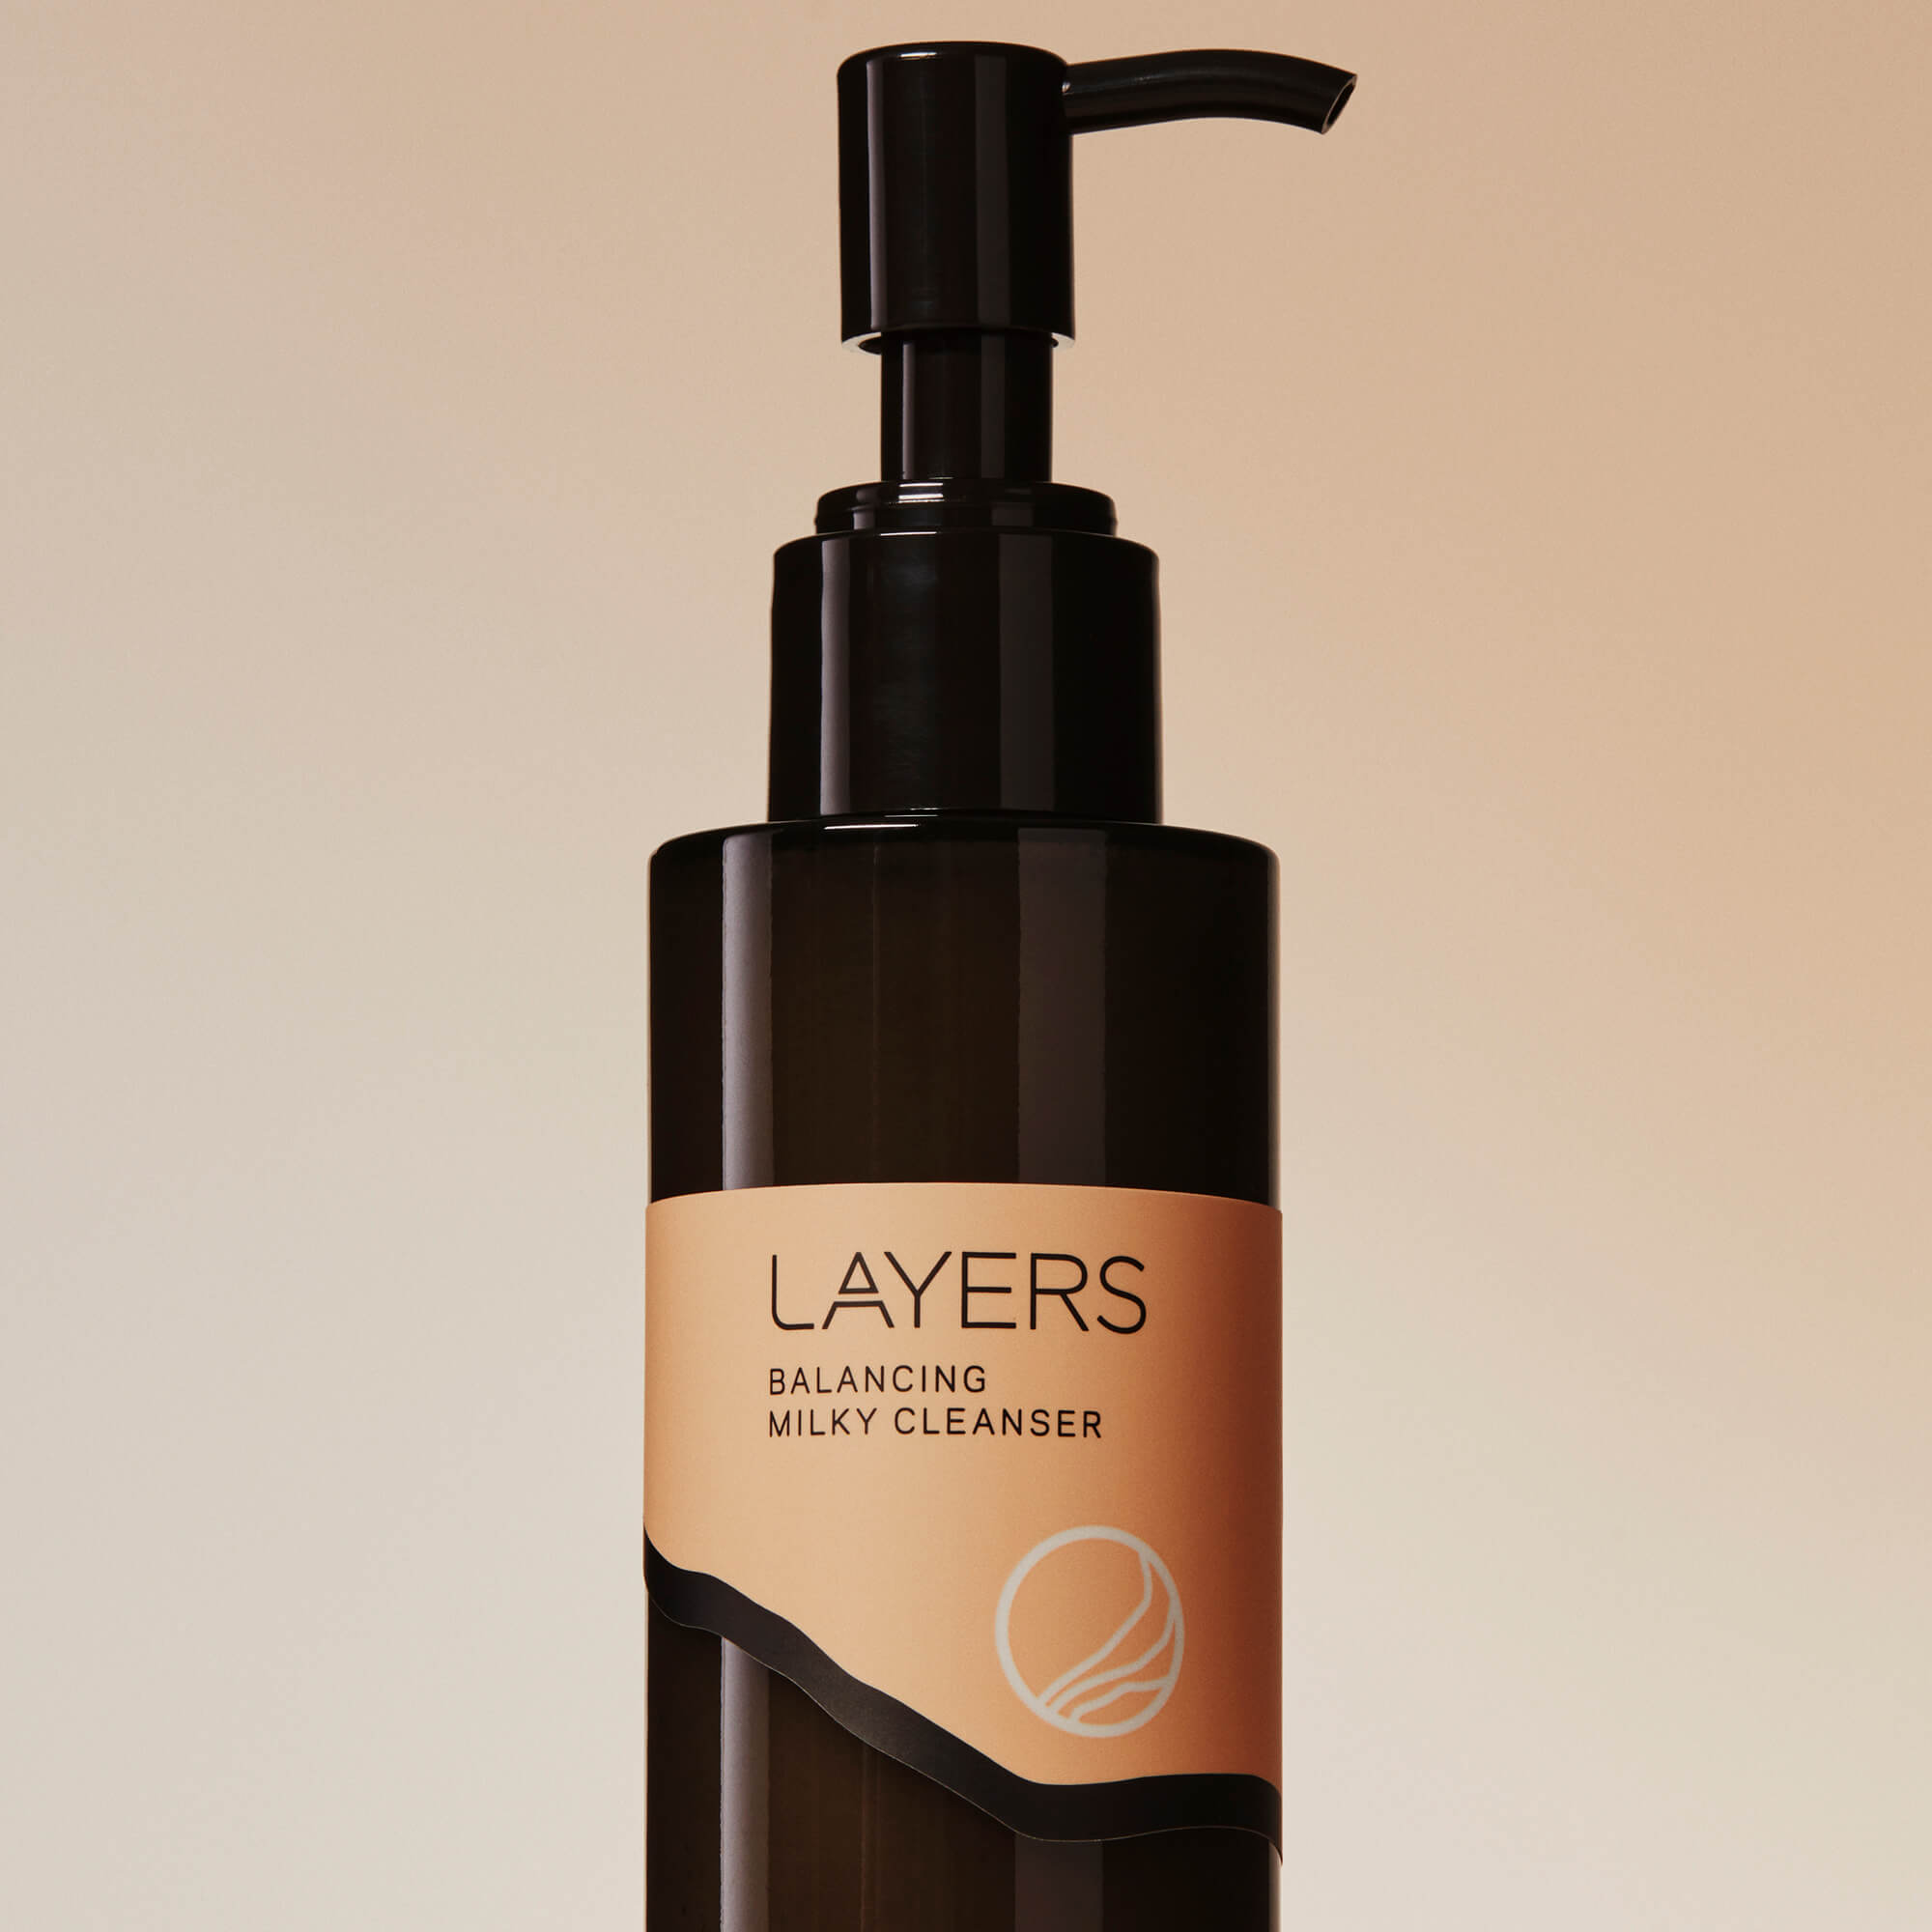 Layers Probiotic Skincare Balancing Milky Cleanser in semi-transparent black glass bottle with pump. For dry, oily, and combination skin. 